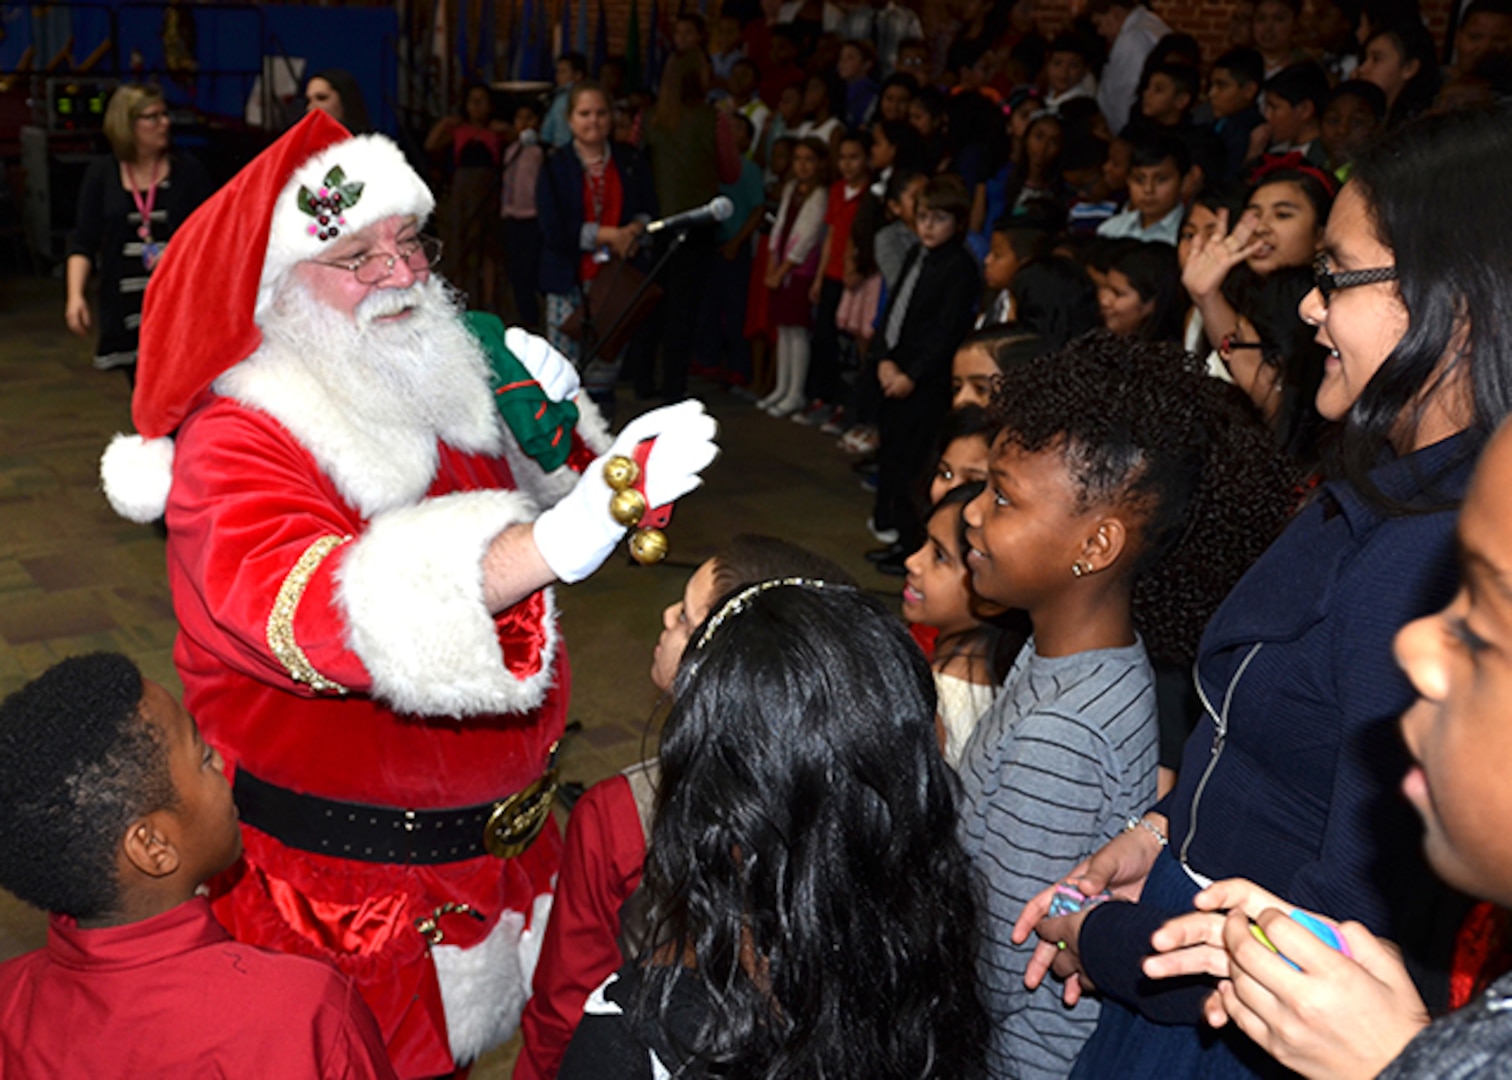 Santa paid a visit to Defense Supply Center Richmond, Virginia on Dec. 14, 2016 to greet the children from Bensley Elementary School who performed during the Center’s annual Tree Lighting Ceremony.